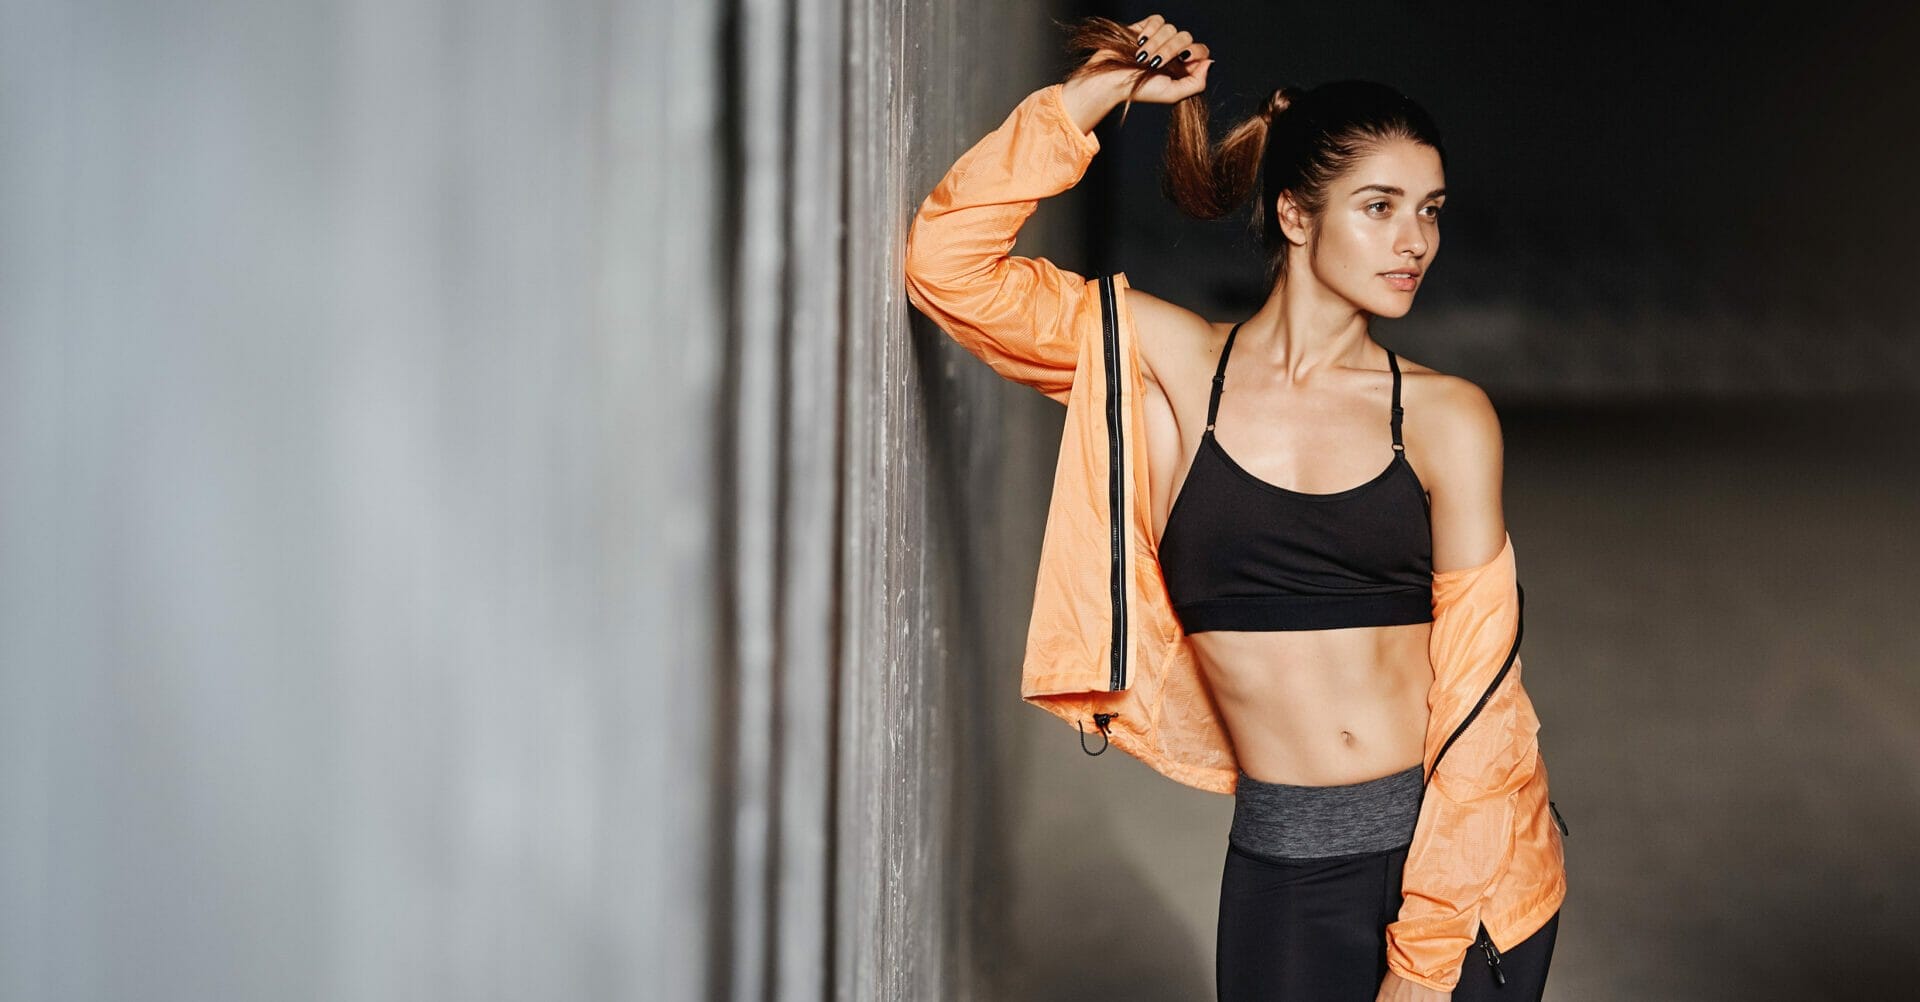 A woman in workout clothes leaning against a wall.